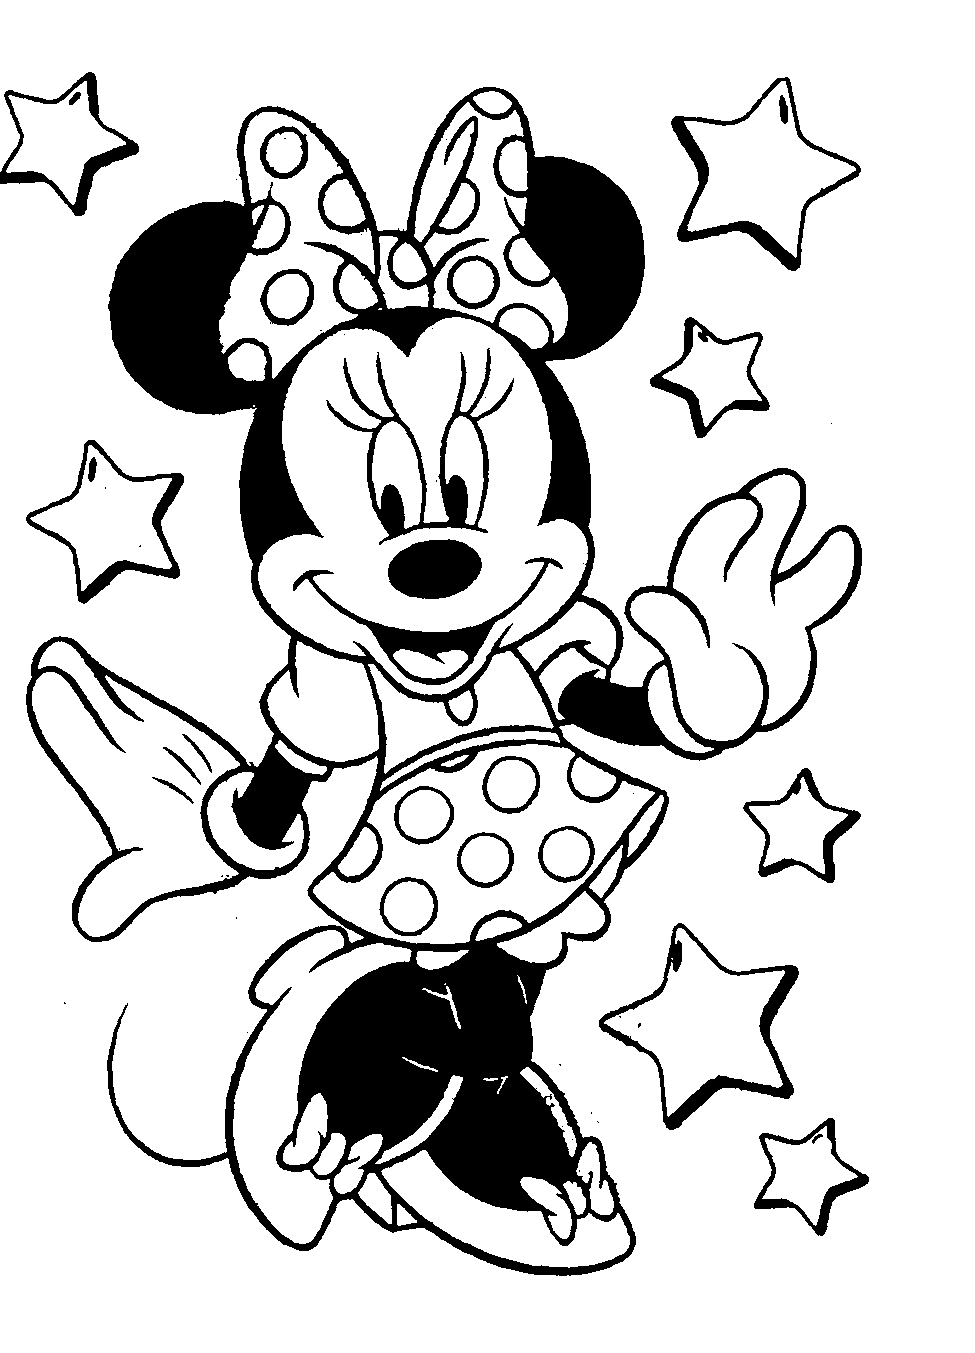 coloring pages of disney characters walt disney characters images walt disney coloring pages coloring pages characters of disney 